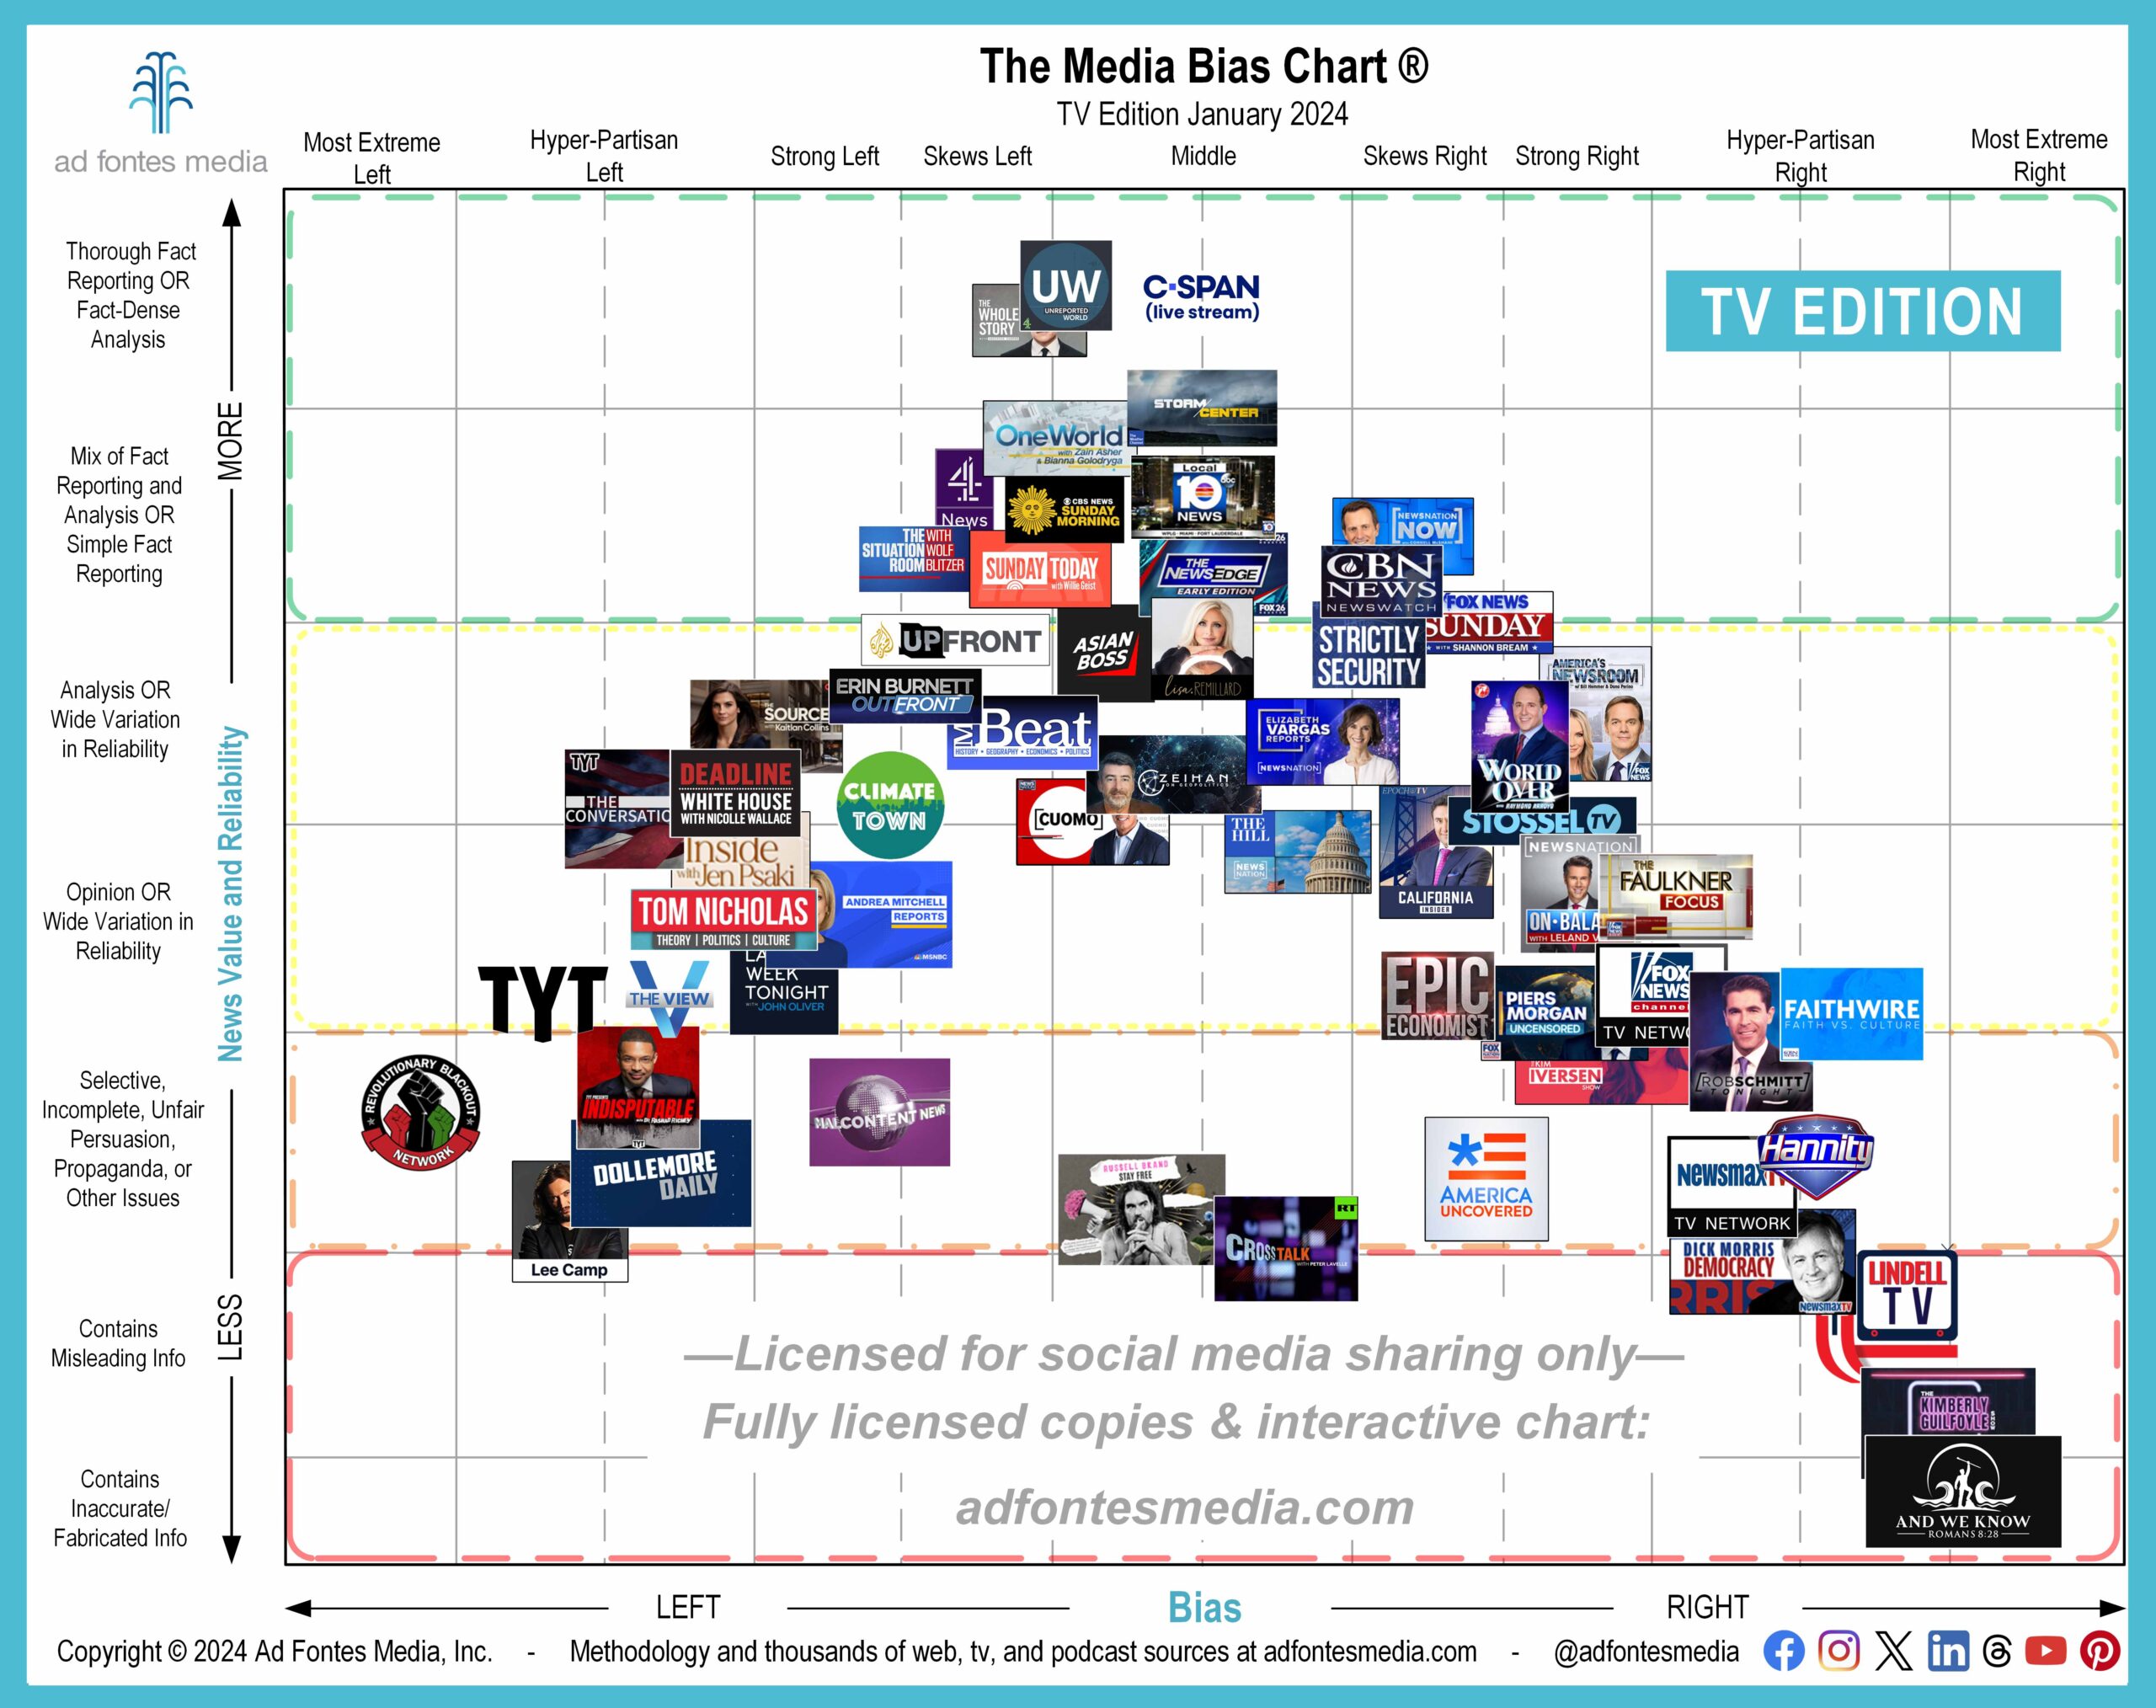 6 TV/Video Shows Debut on the Media Bias Chart